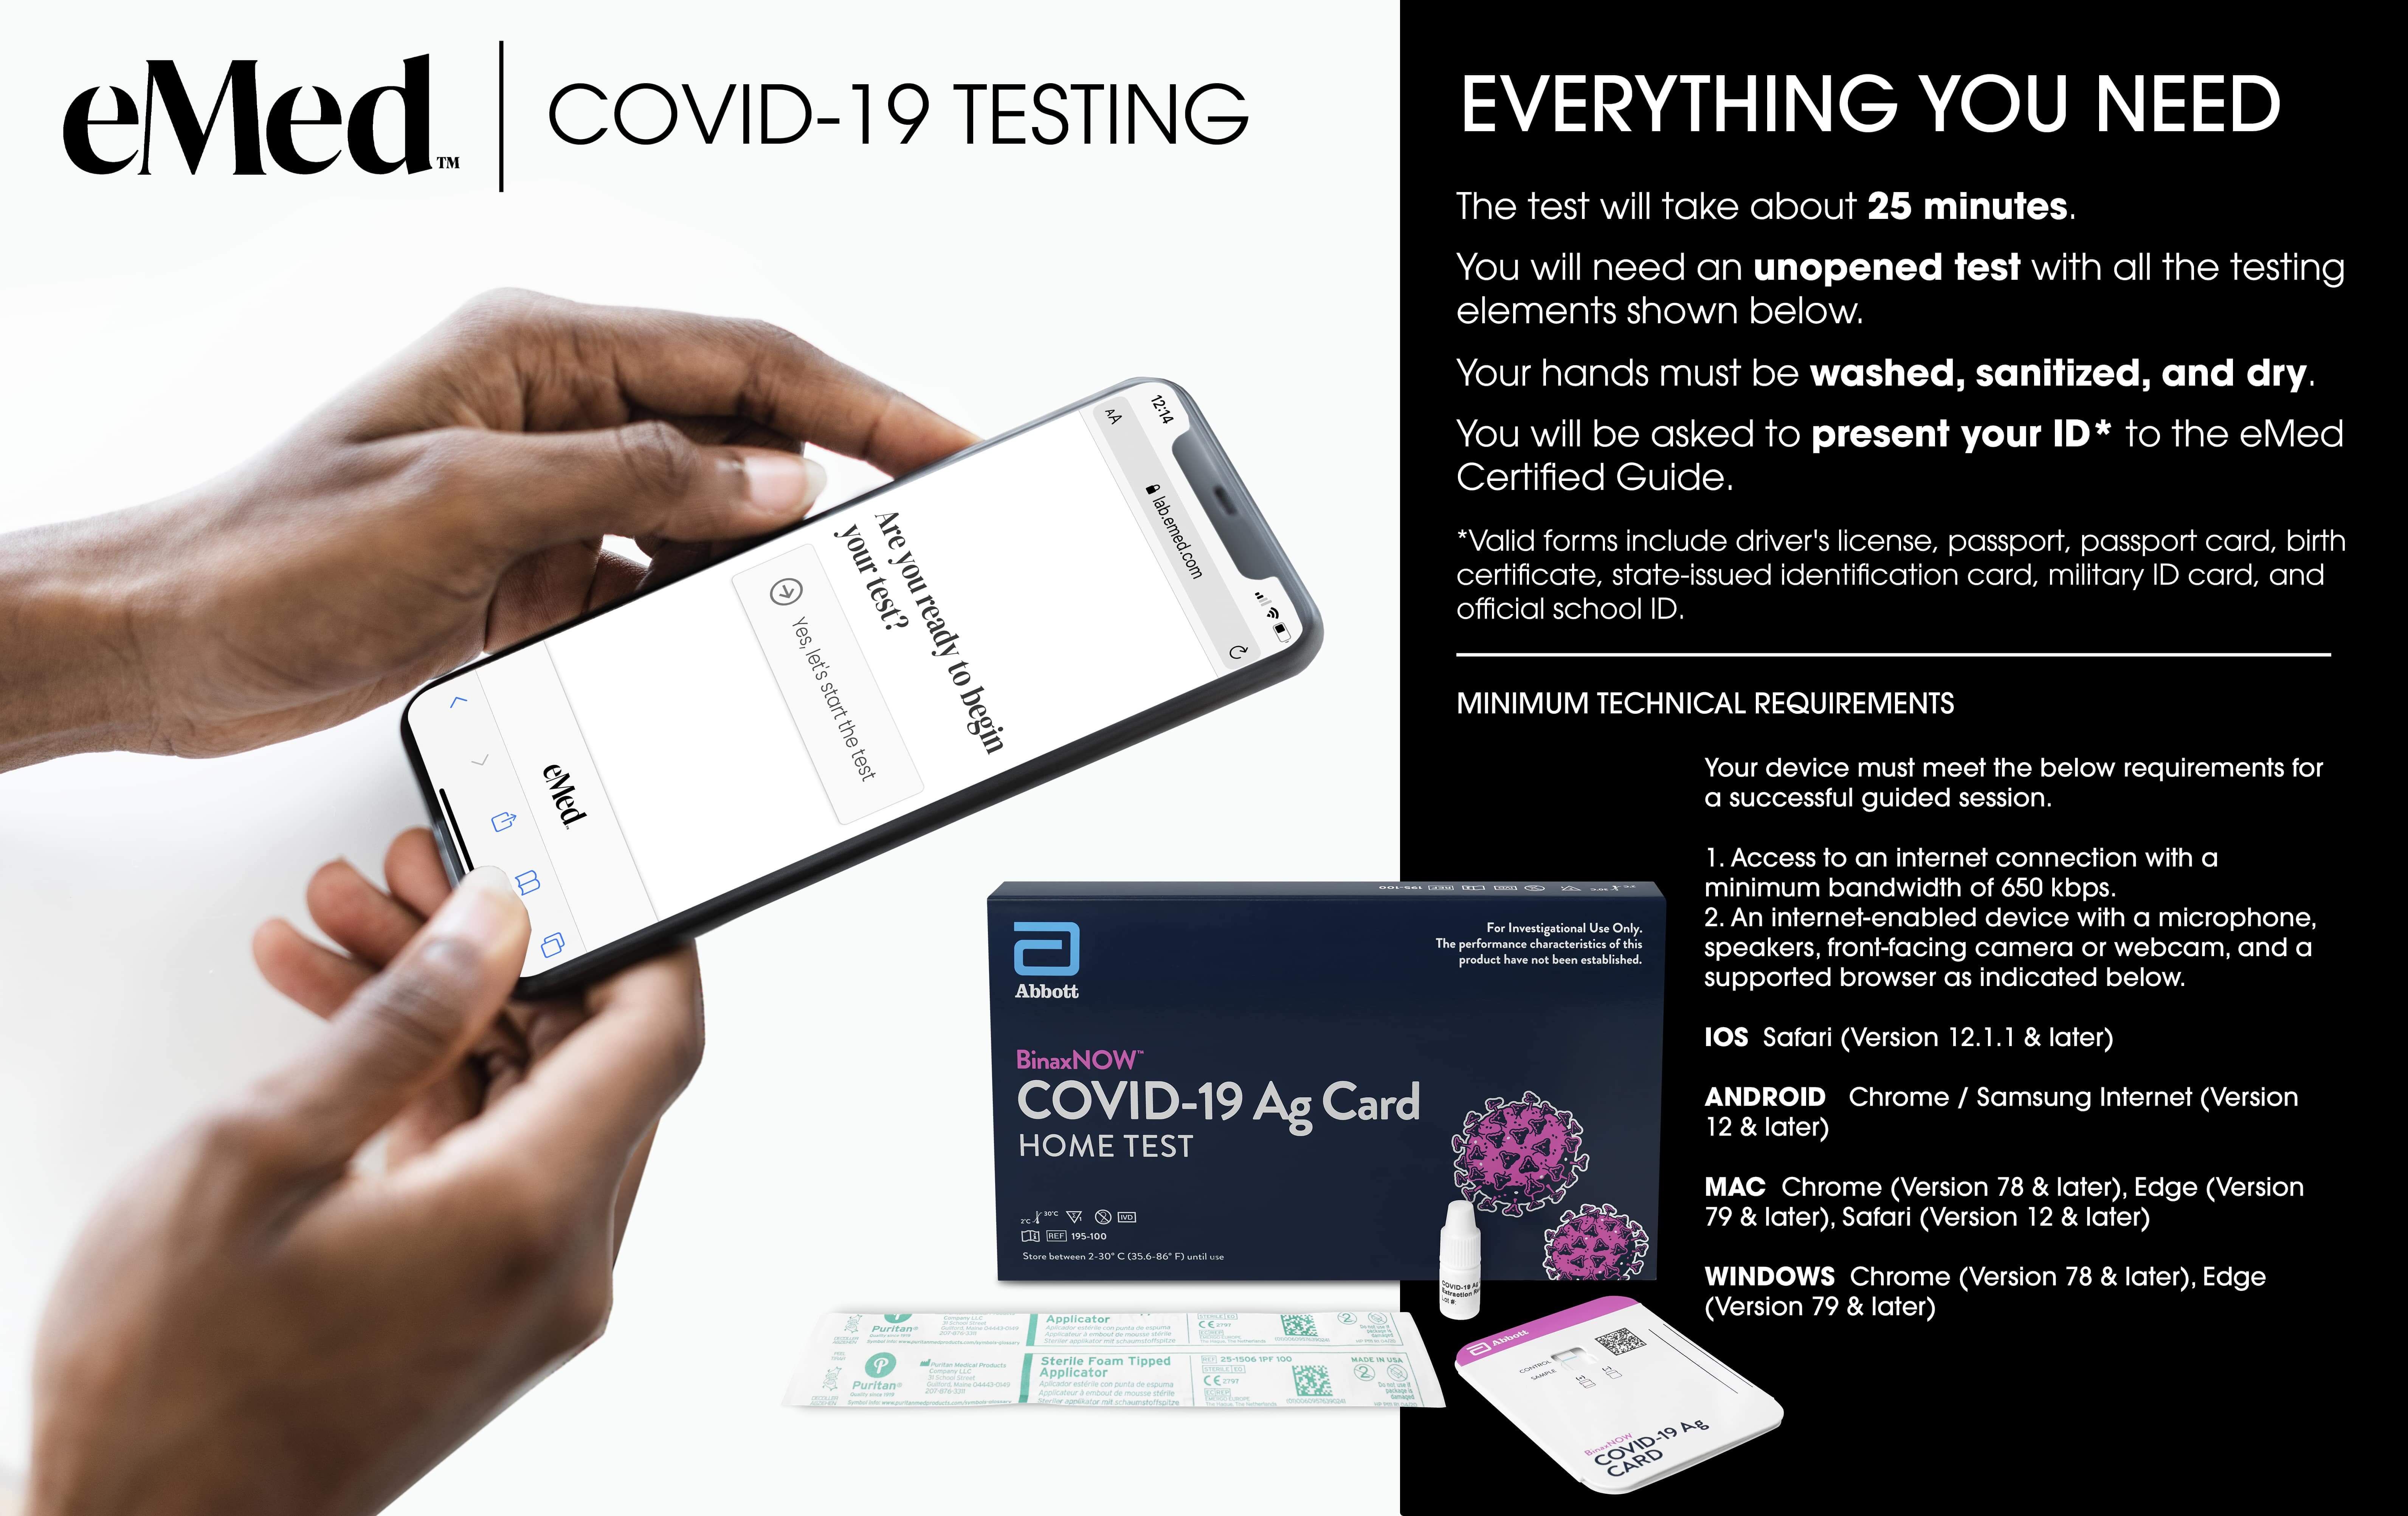 DISCAbbott BinaxNOW™ COVID-19 Antigen Home Test with eMed Telehealth Services - 2 Pack for Royal Caribbean